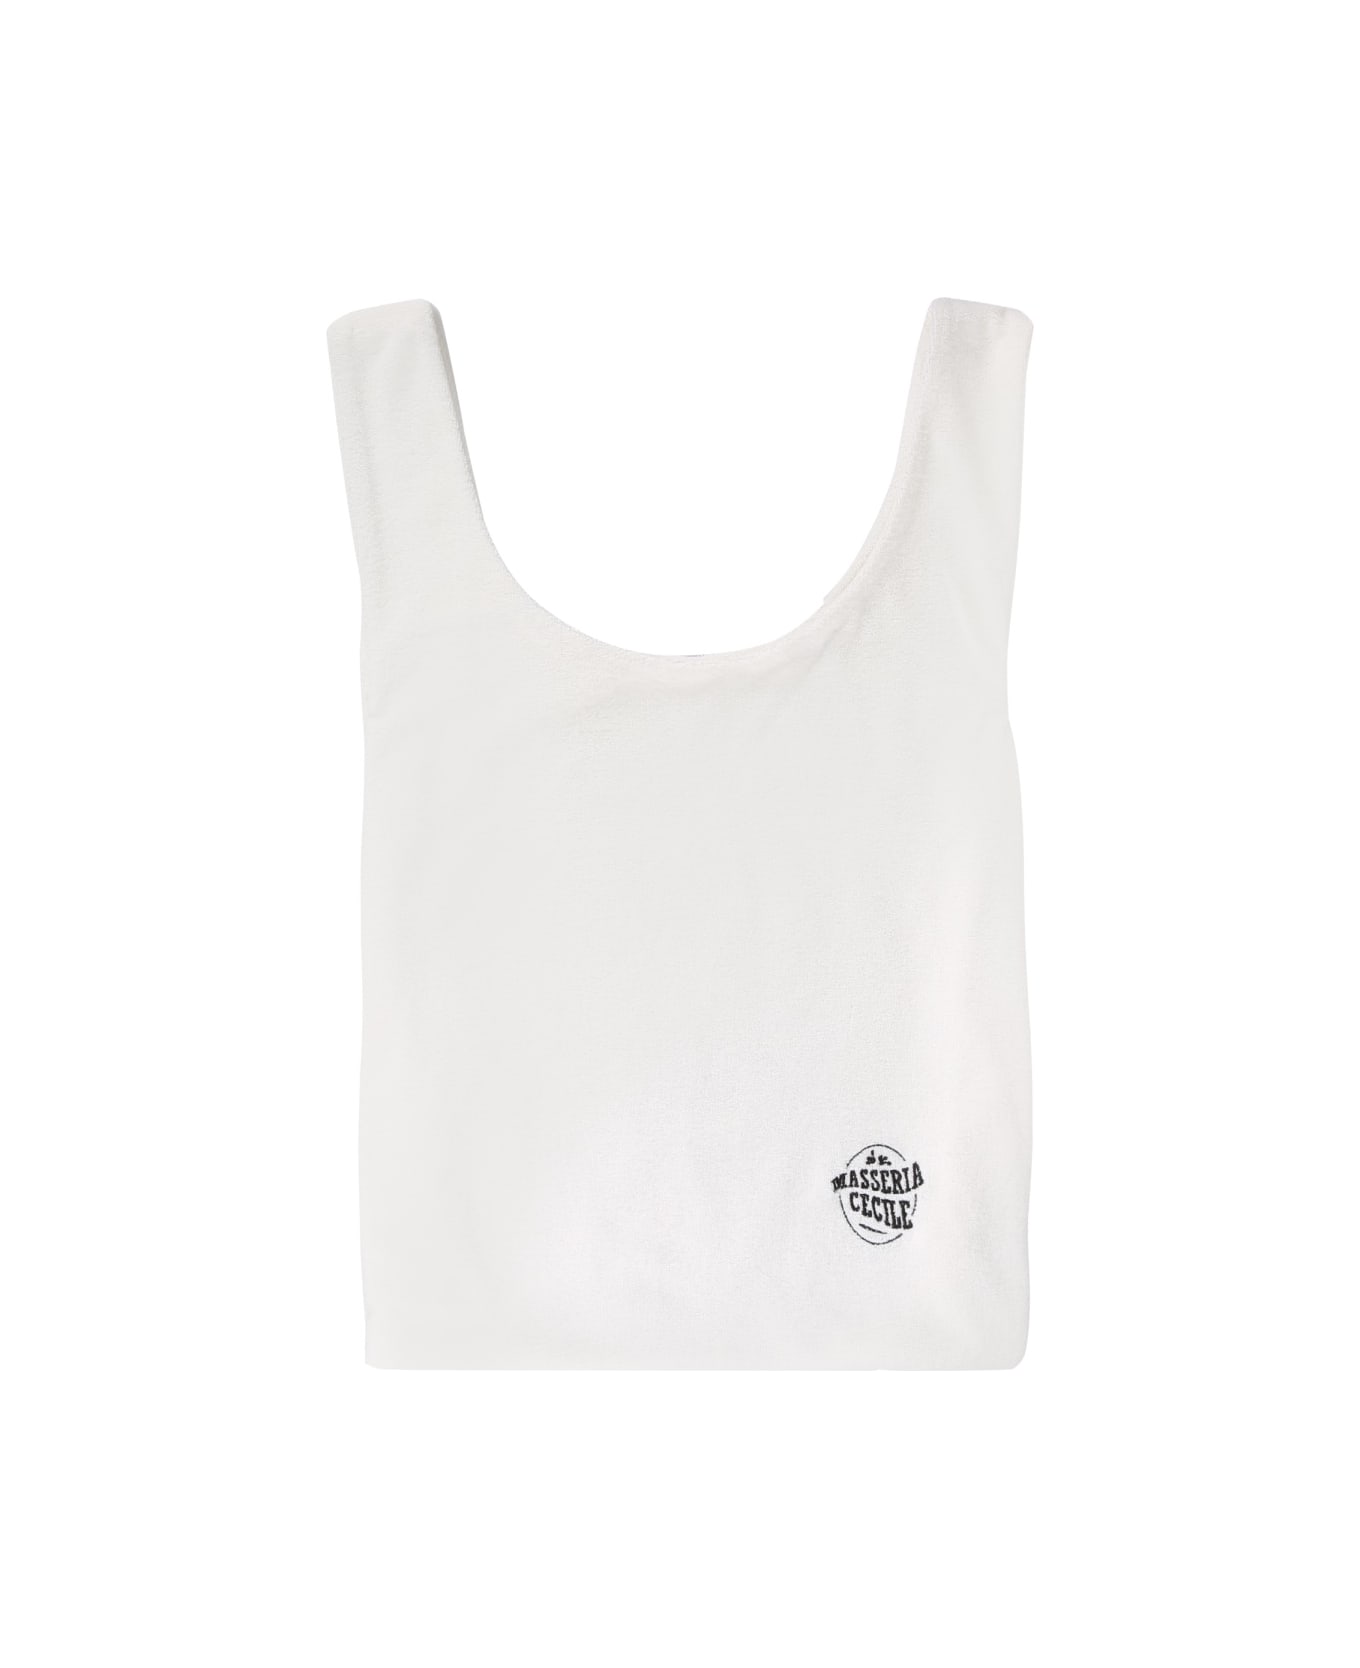 Etre Cecile Andy C Singer Beach Bag - IVORY トートバッグ